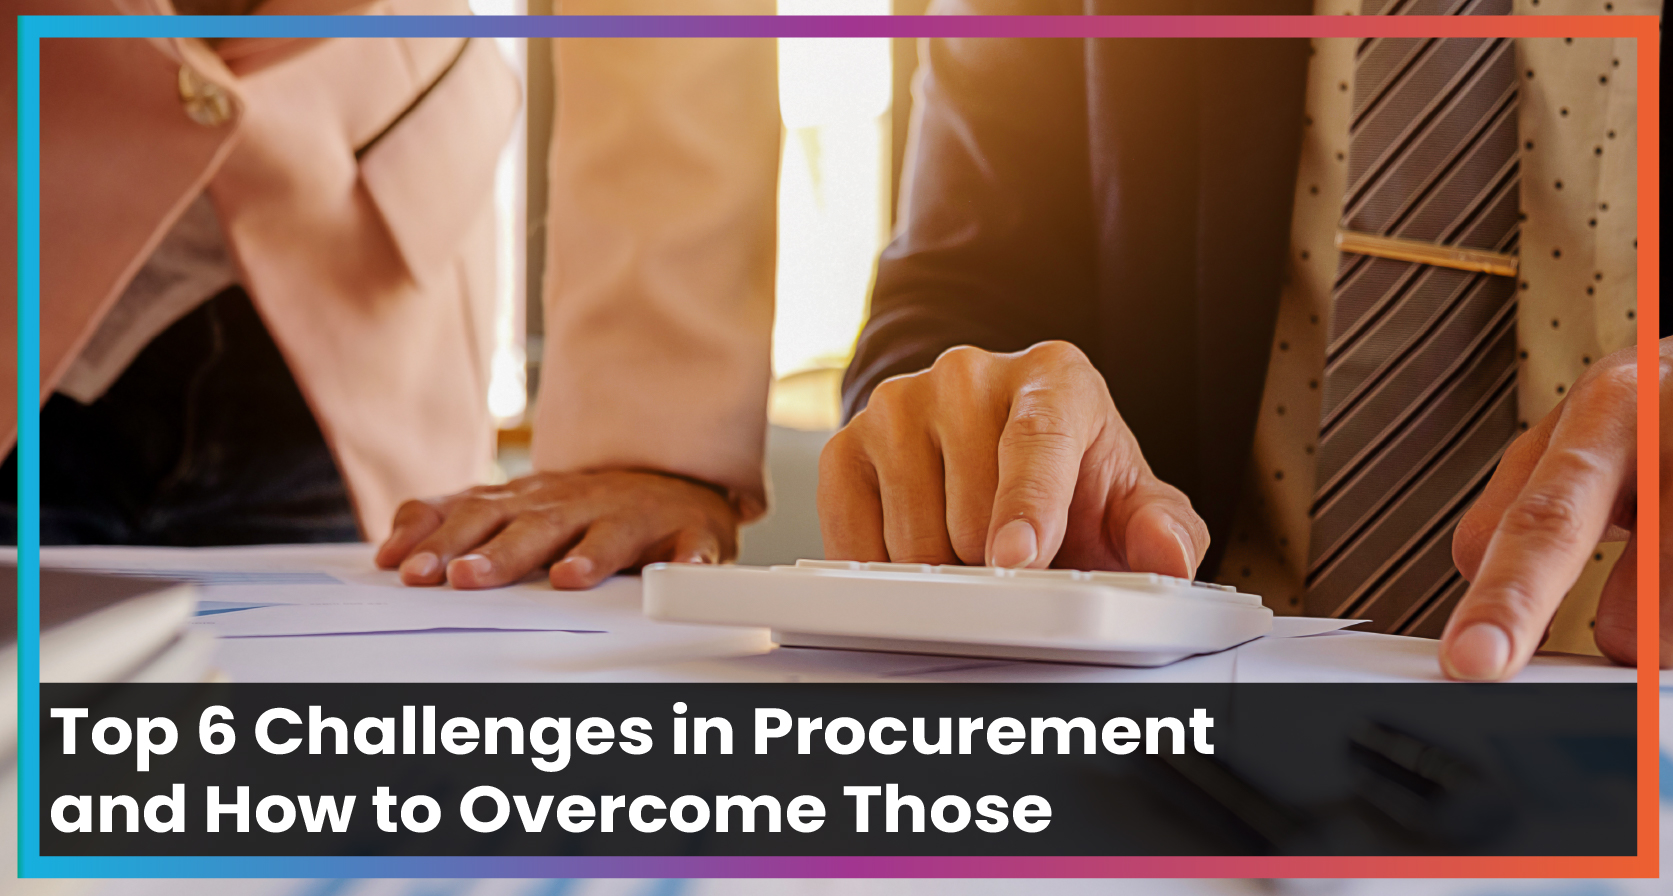 Top 6 Challenges in Procurement and How to Overcome Those